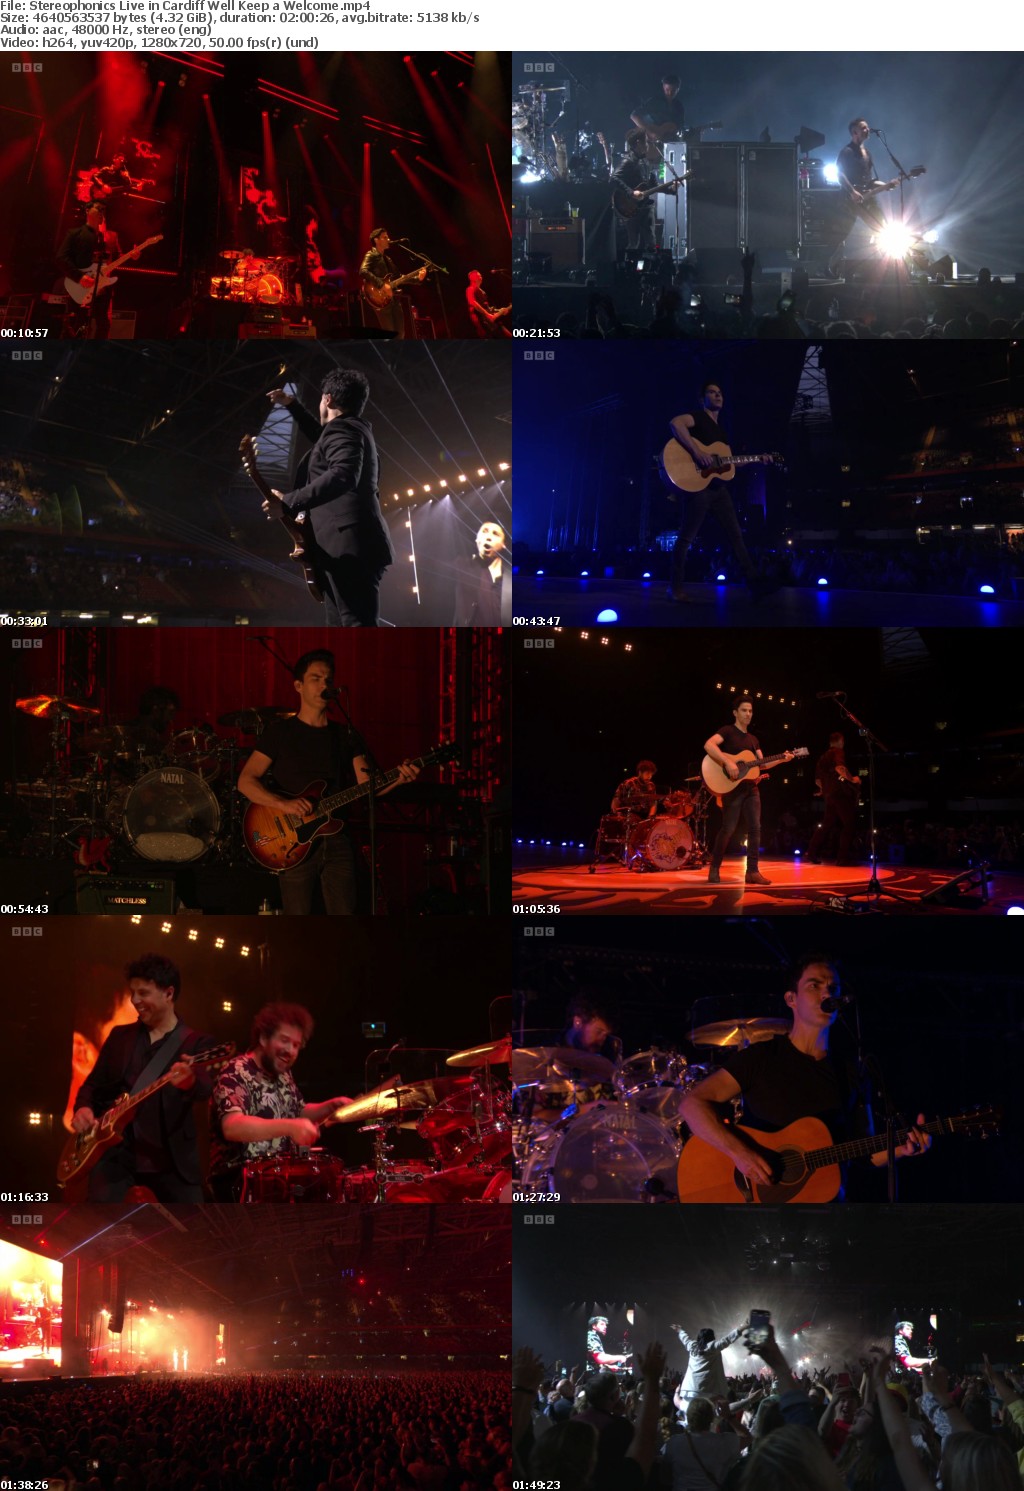 Stereophonics Live in Cardiff Well Keep a Welcome (1280x720p HD, 50fps, soft Eng subs)